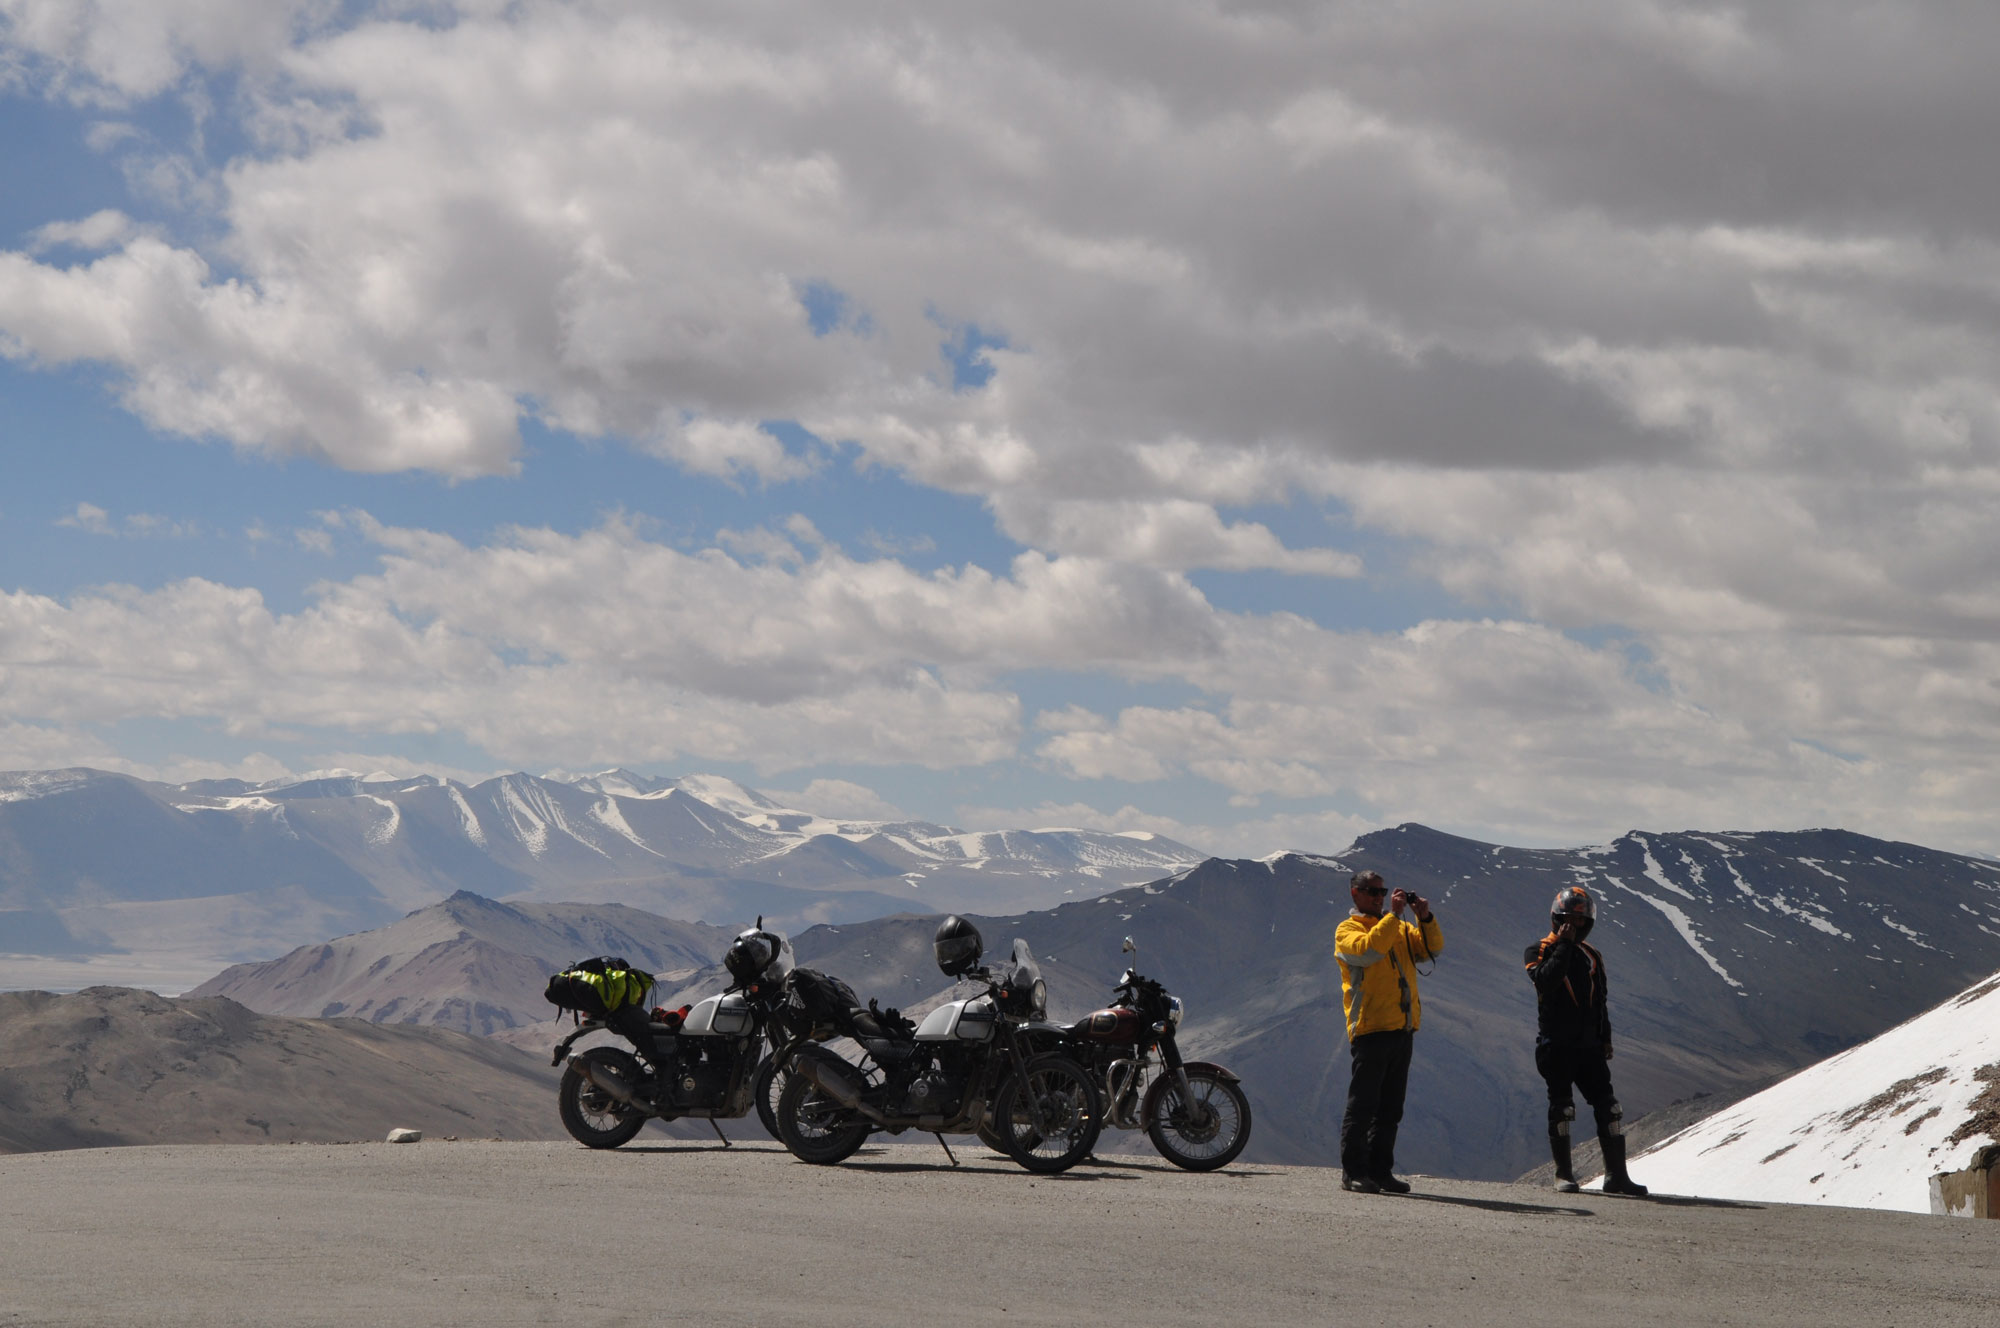 8-UK-Adv-Biker_s-Extreme-Moto-Expedition-in-Himalayas